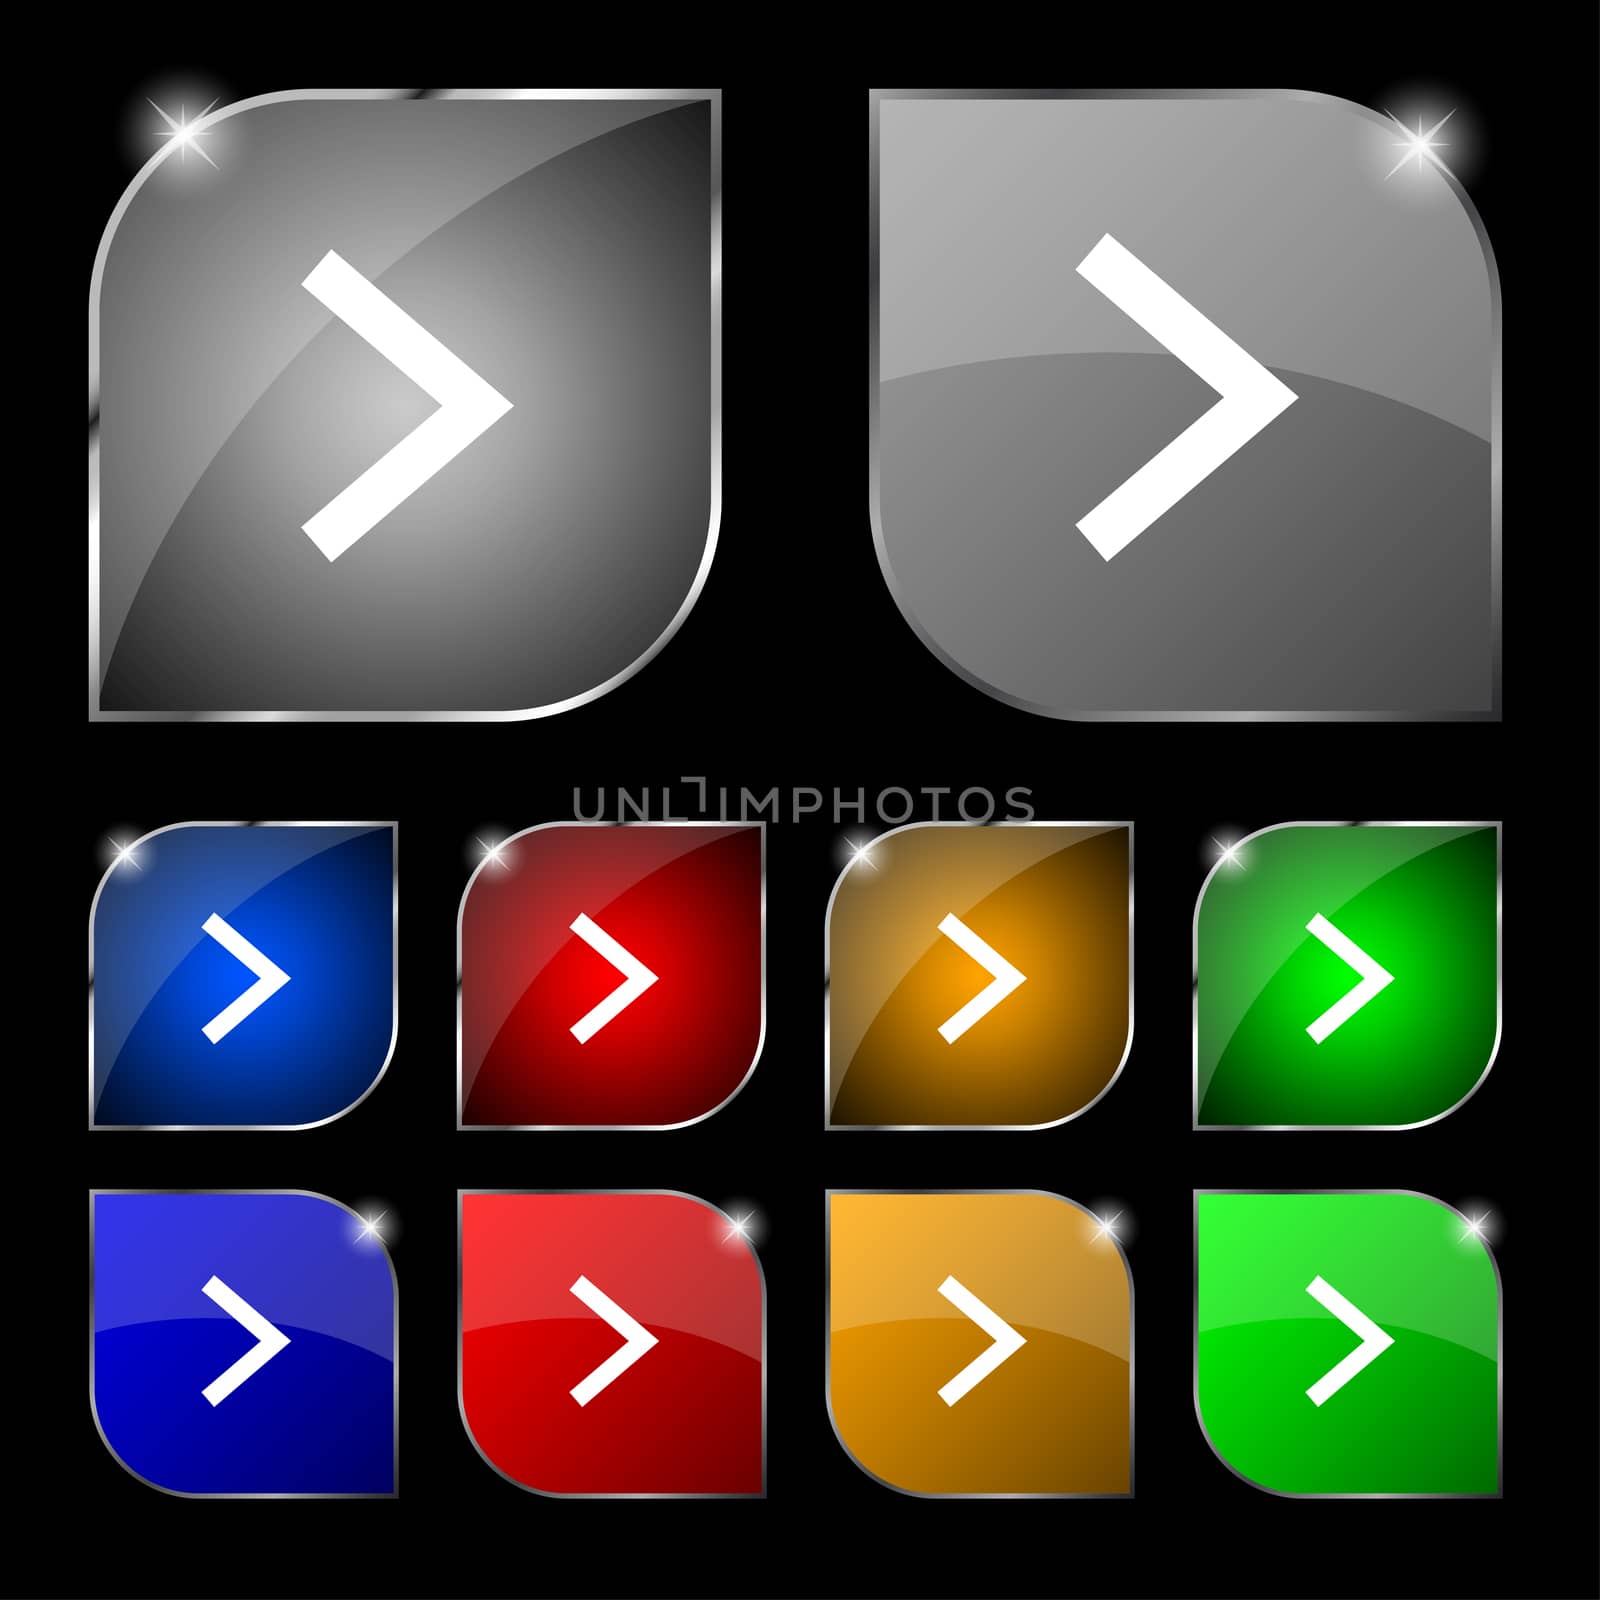 Arrow right, Next icon sign. Set of ten colorful buttons with glare. illustration